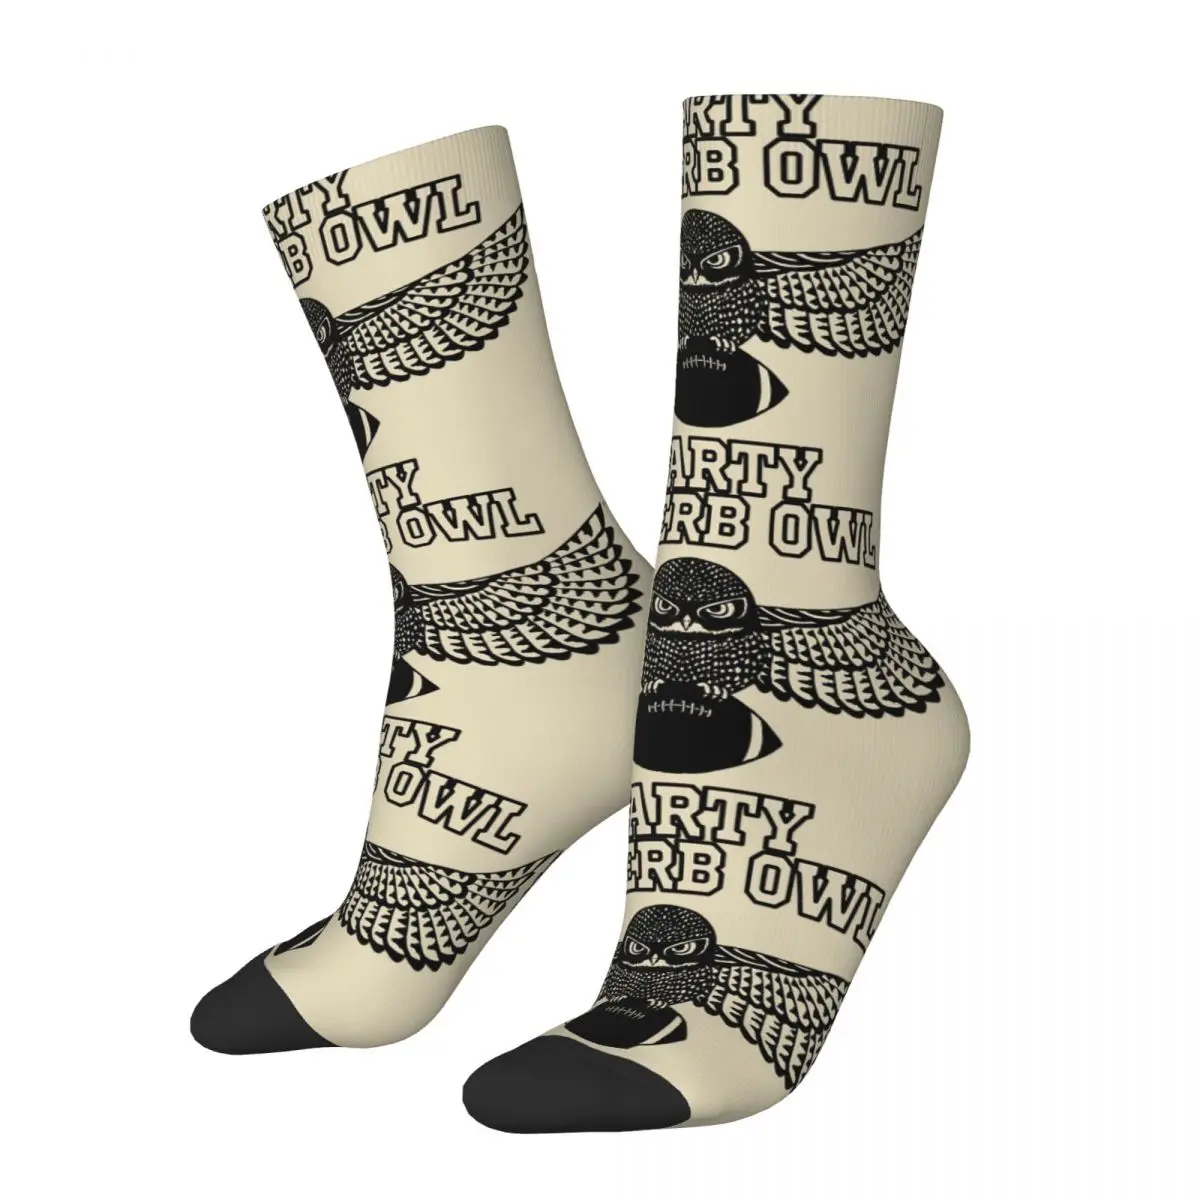 

Funny Crazy Sock for Men SUPERB OWL PARTY Hip Hop Harajuku What We Do In The Shadows TV Happy Pattern Printed Boys Crew Sock